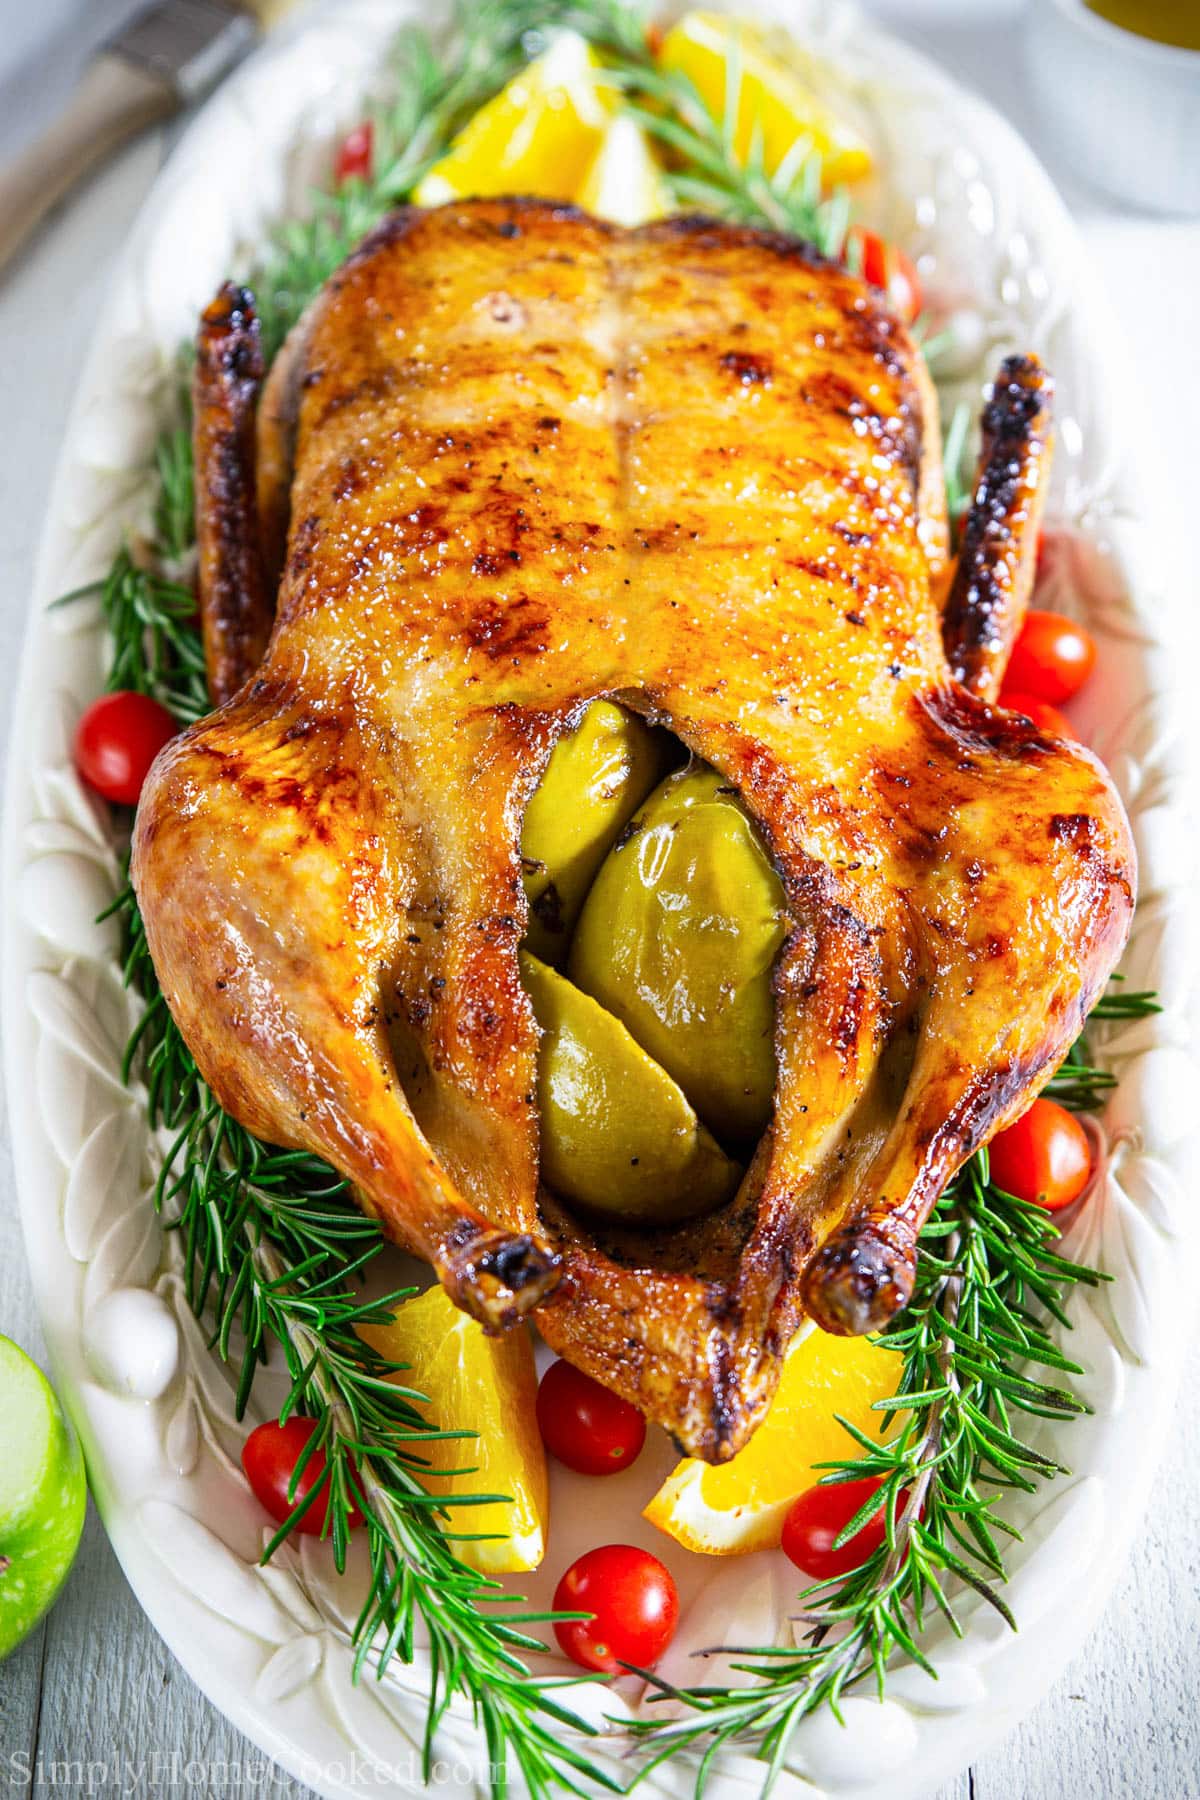 Roast Duck stuffed with apples and surrounded by rosemary, tomatoes, and oranges.